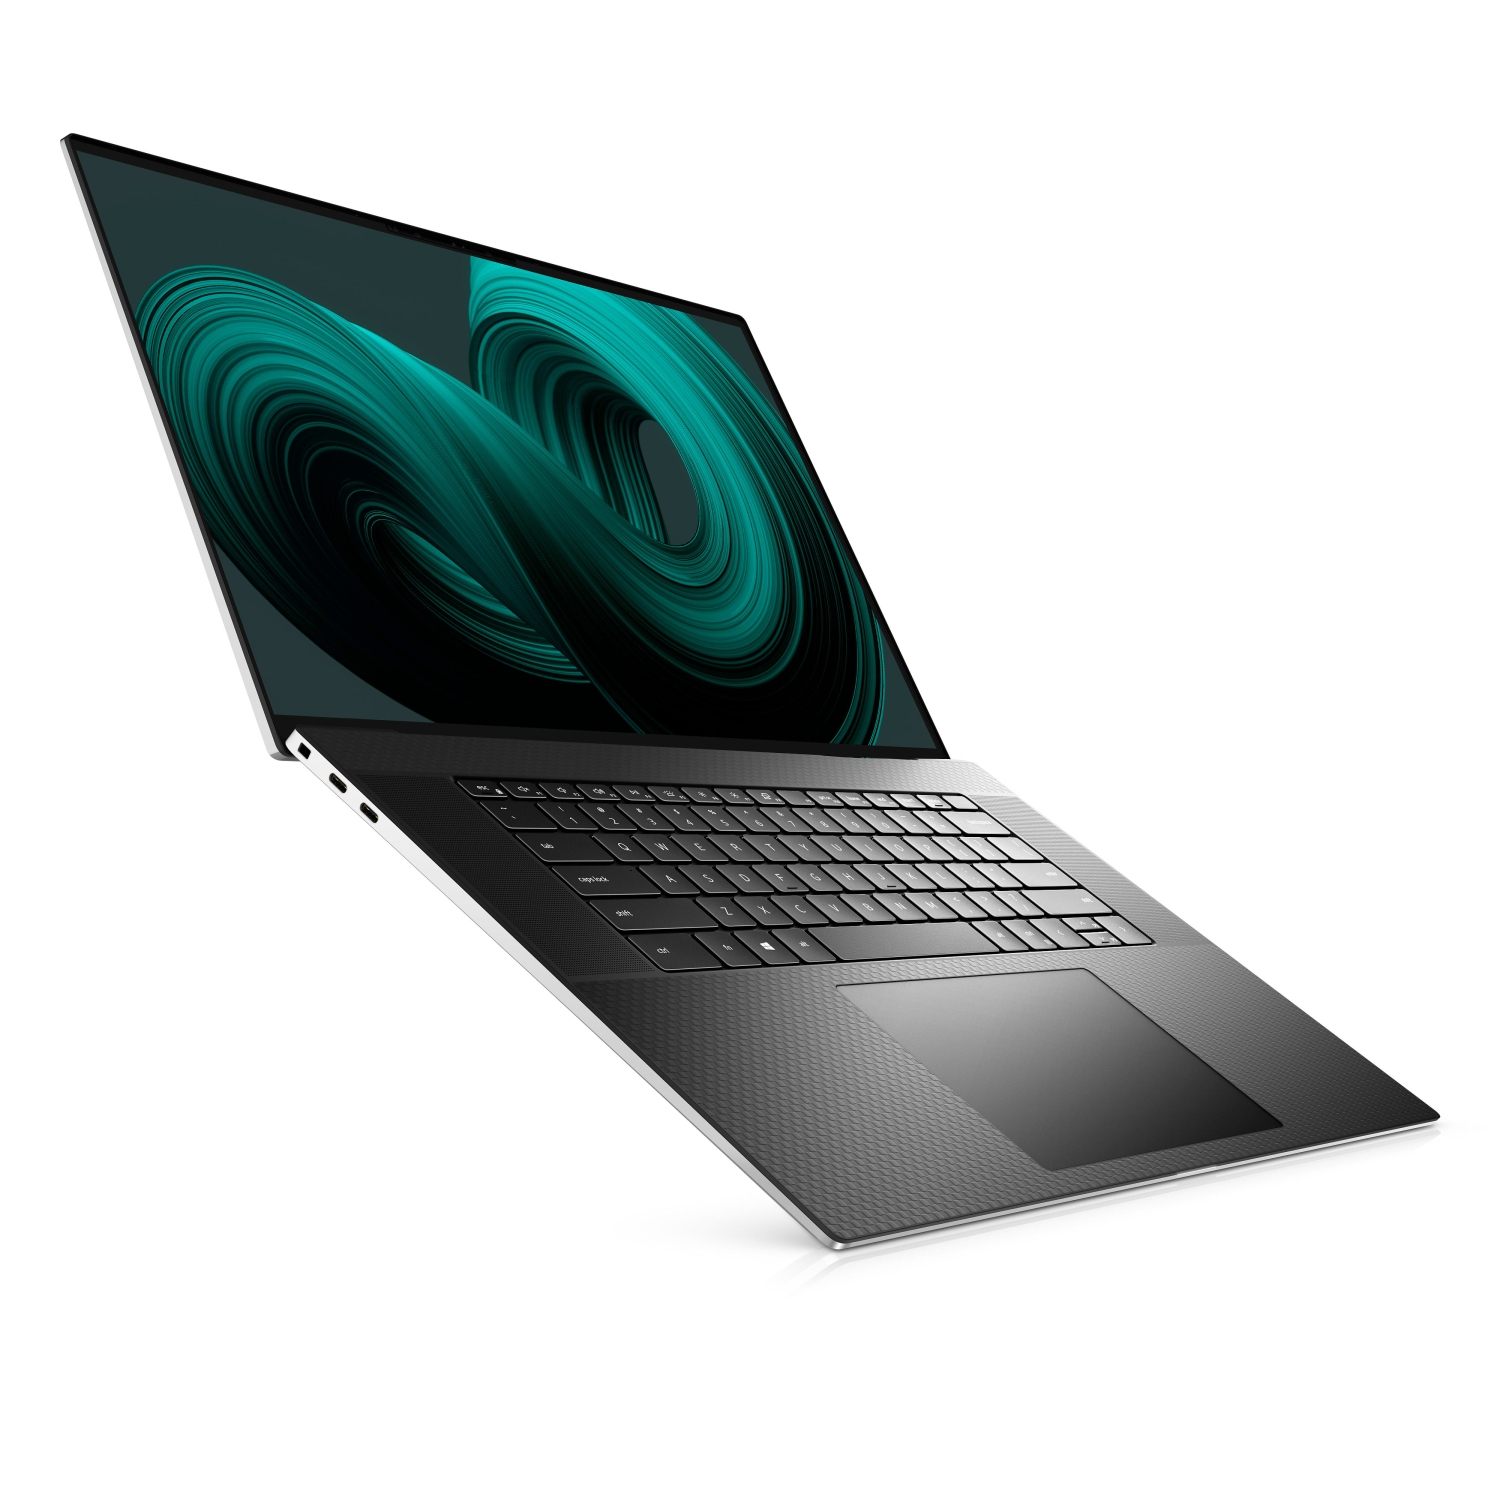 Refurbished (Excellent) - Dell XPS 17 9710 Laptop (2021) | 17" 4K Touch | Core i7 - 1TB SSD - 16GB RAM - RTX 3060 | 8 Cores @ 4.6 GHz - 11th Gen CPU Certified Refurbished